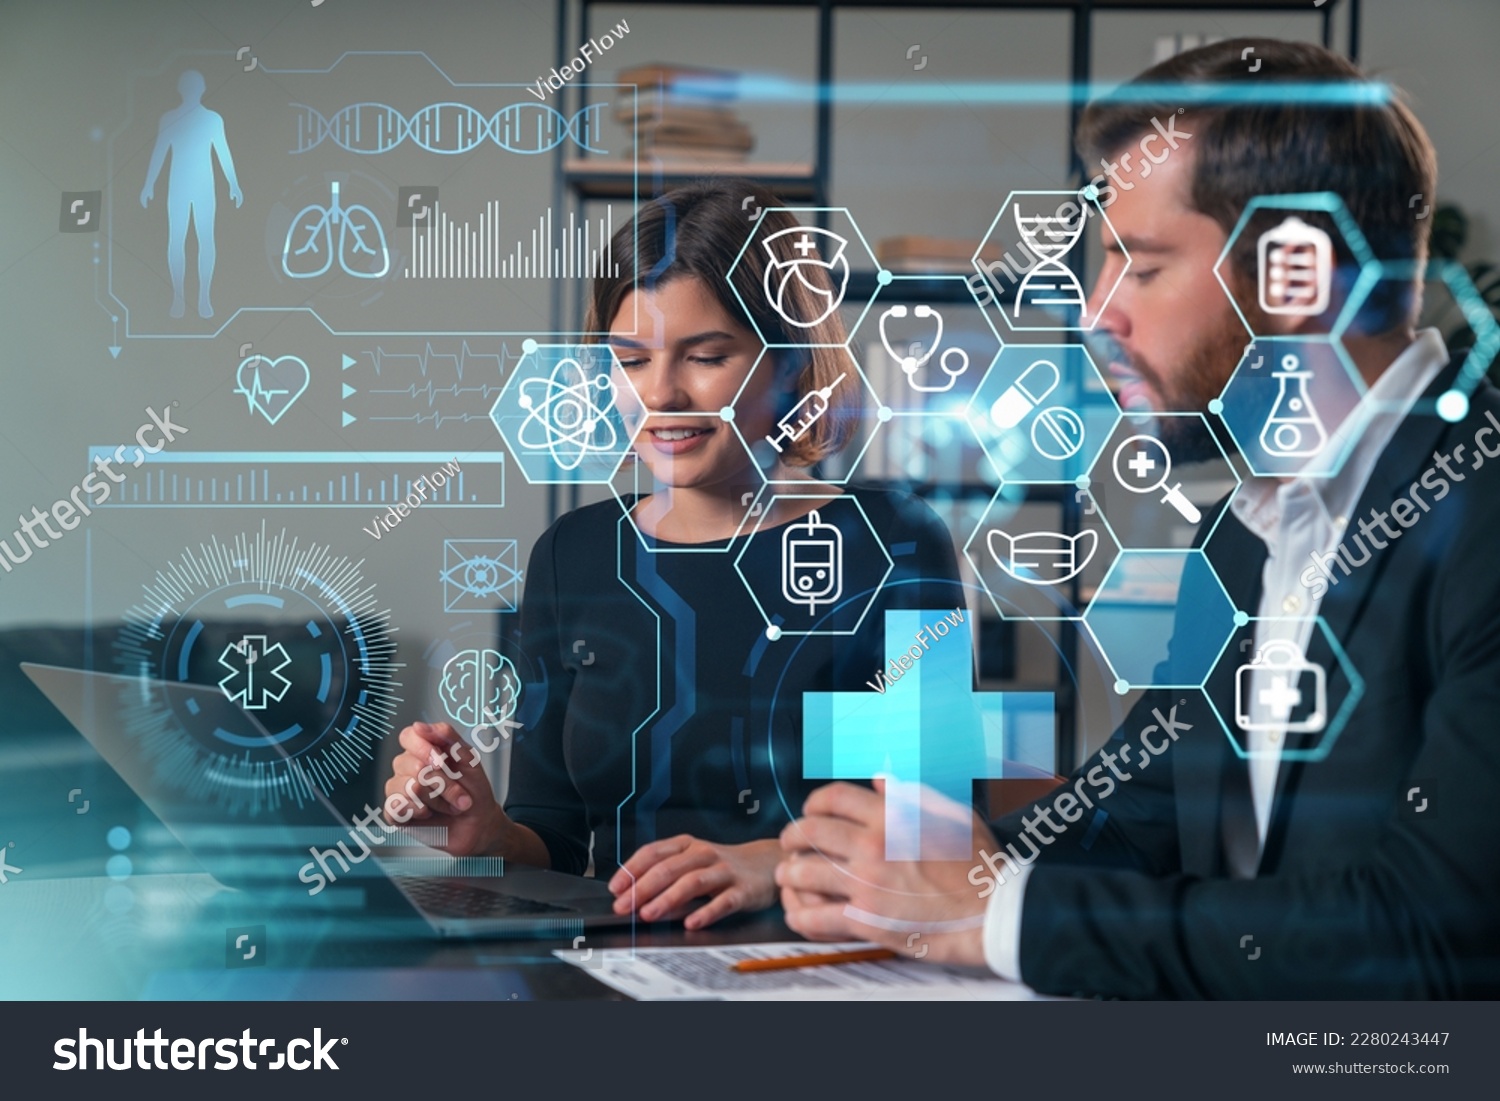 Thoughtful businesspeople typing on laptop at office workplace. Concept of team work, business education, internet surfing, brainstorm, project information technology. Medical healthcare hologram #2280243447